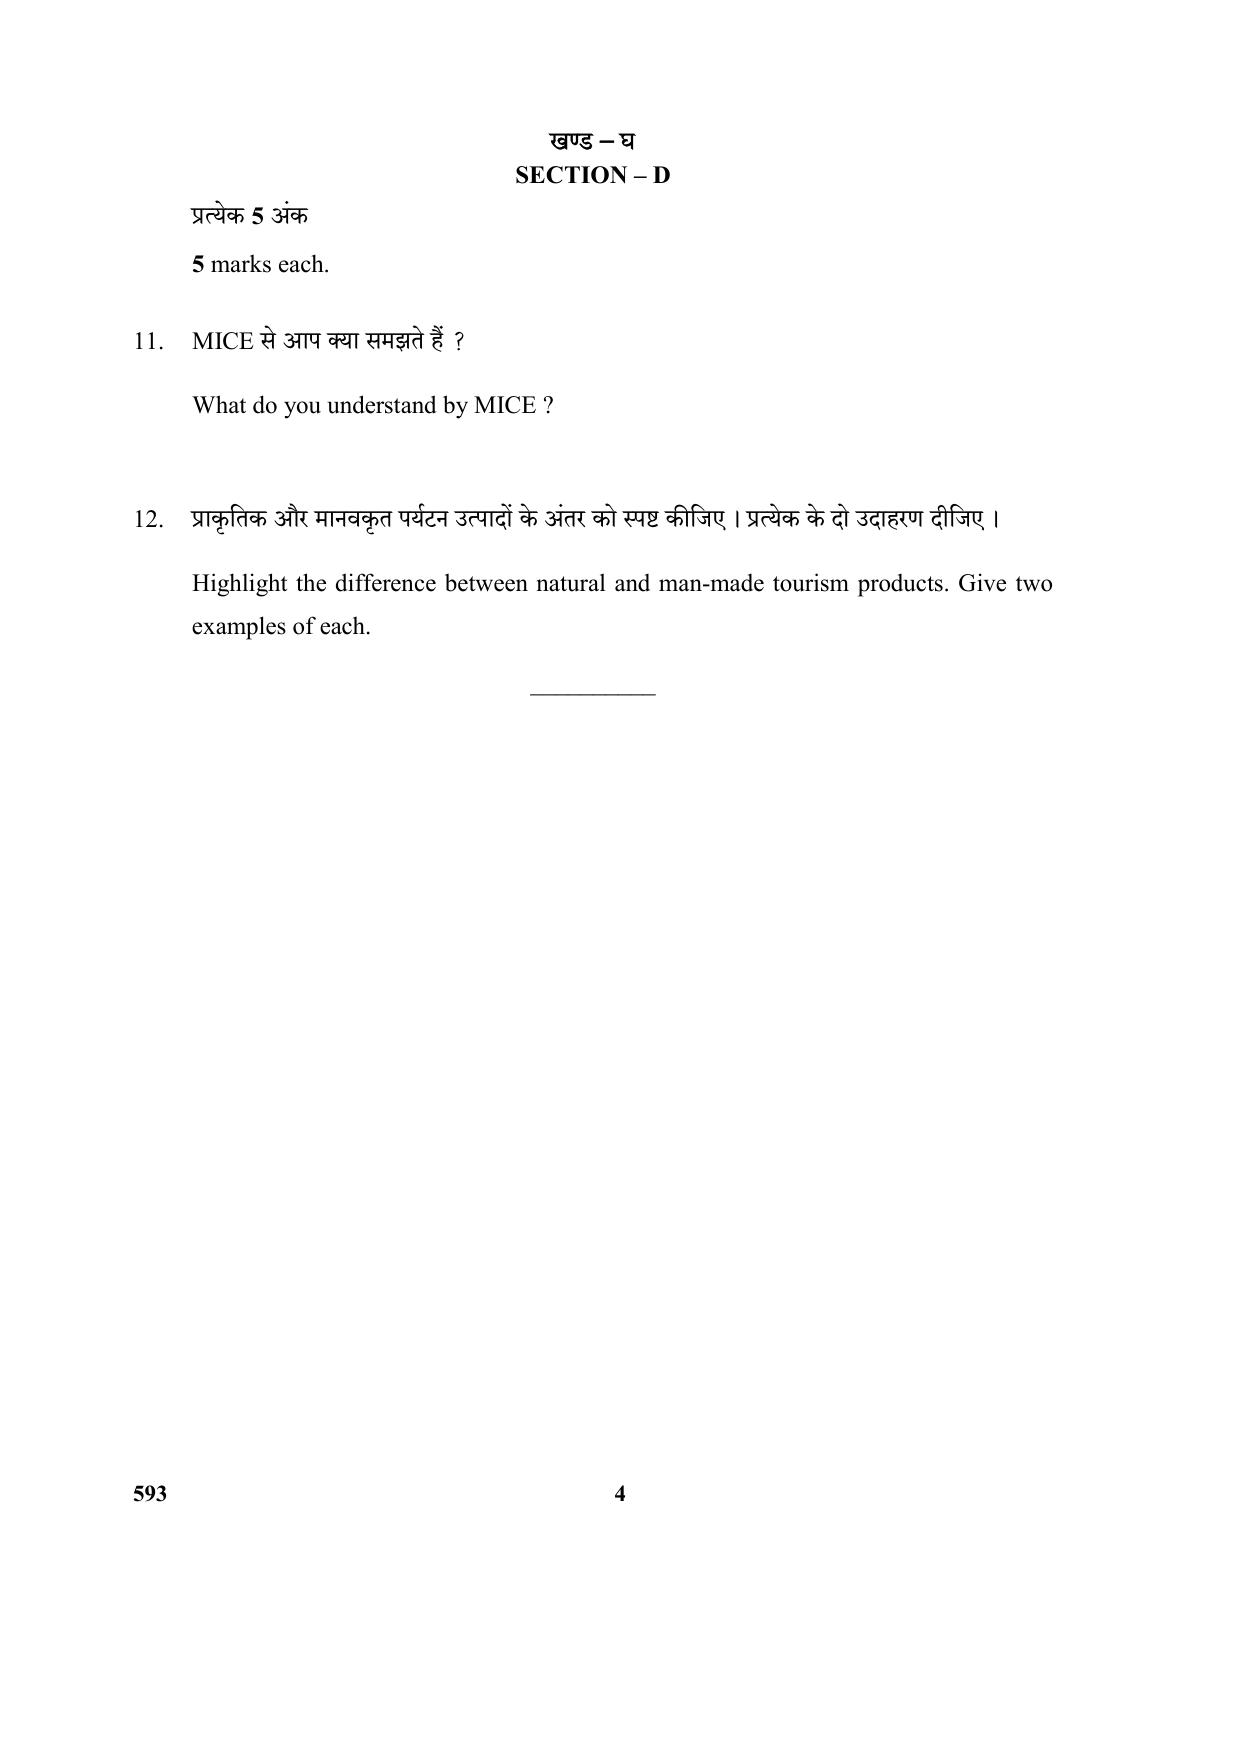 CBSE Class 10 Intro. To Tourism II_N 2017-comptt Question Paper - Page 4